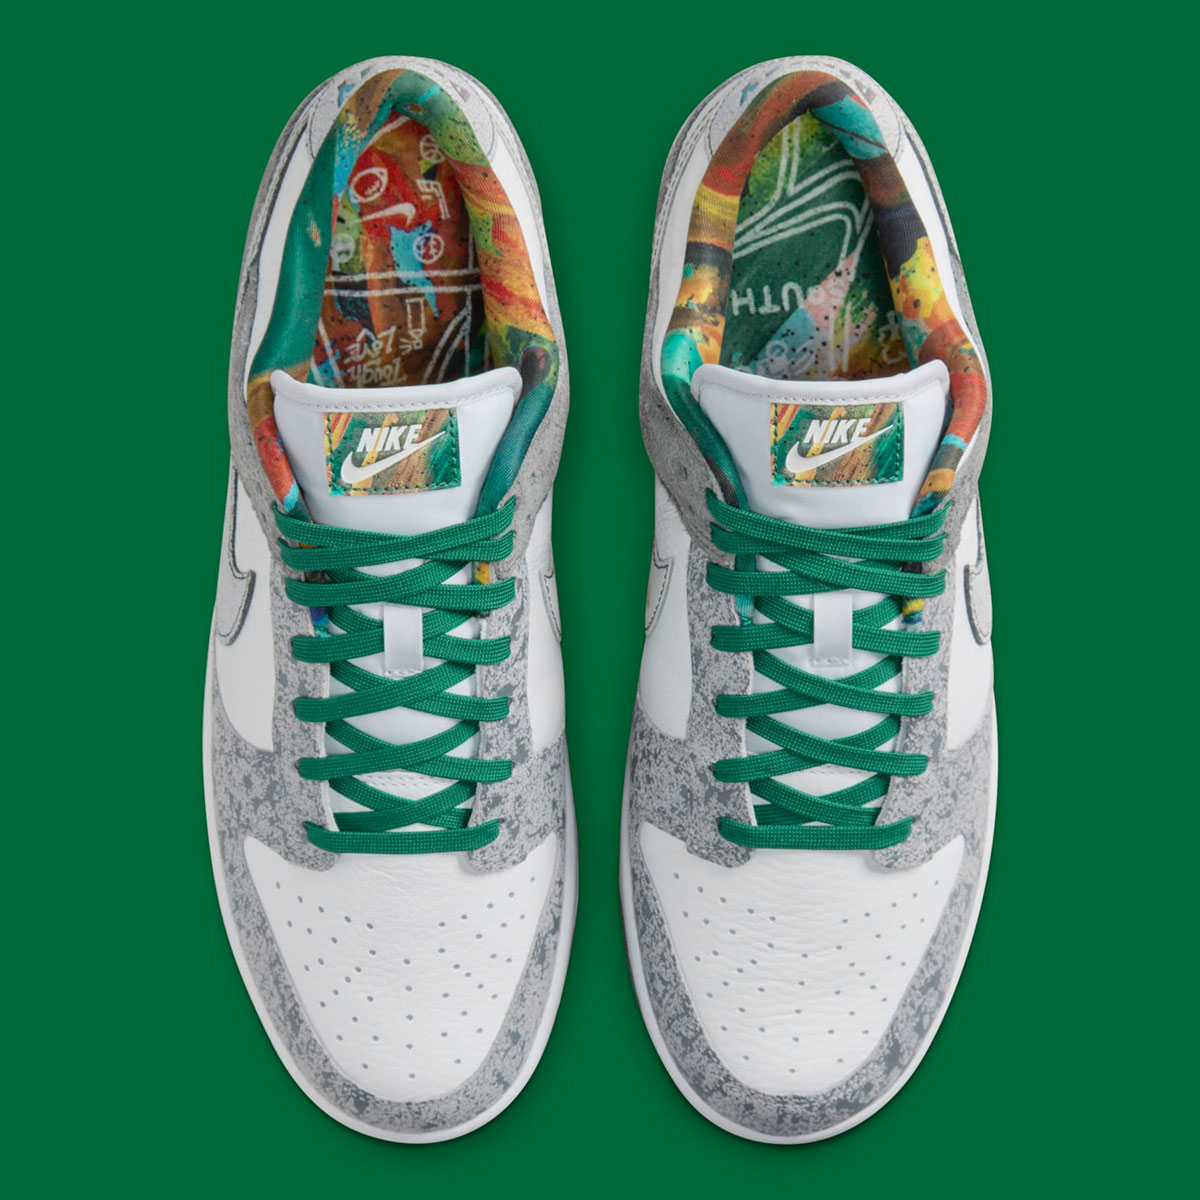 Nike Dunk Low Philly Hf4840 068 Release Date 9